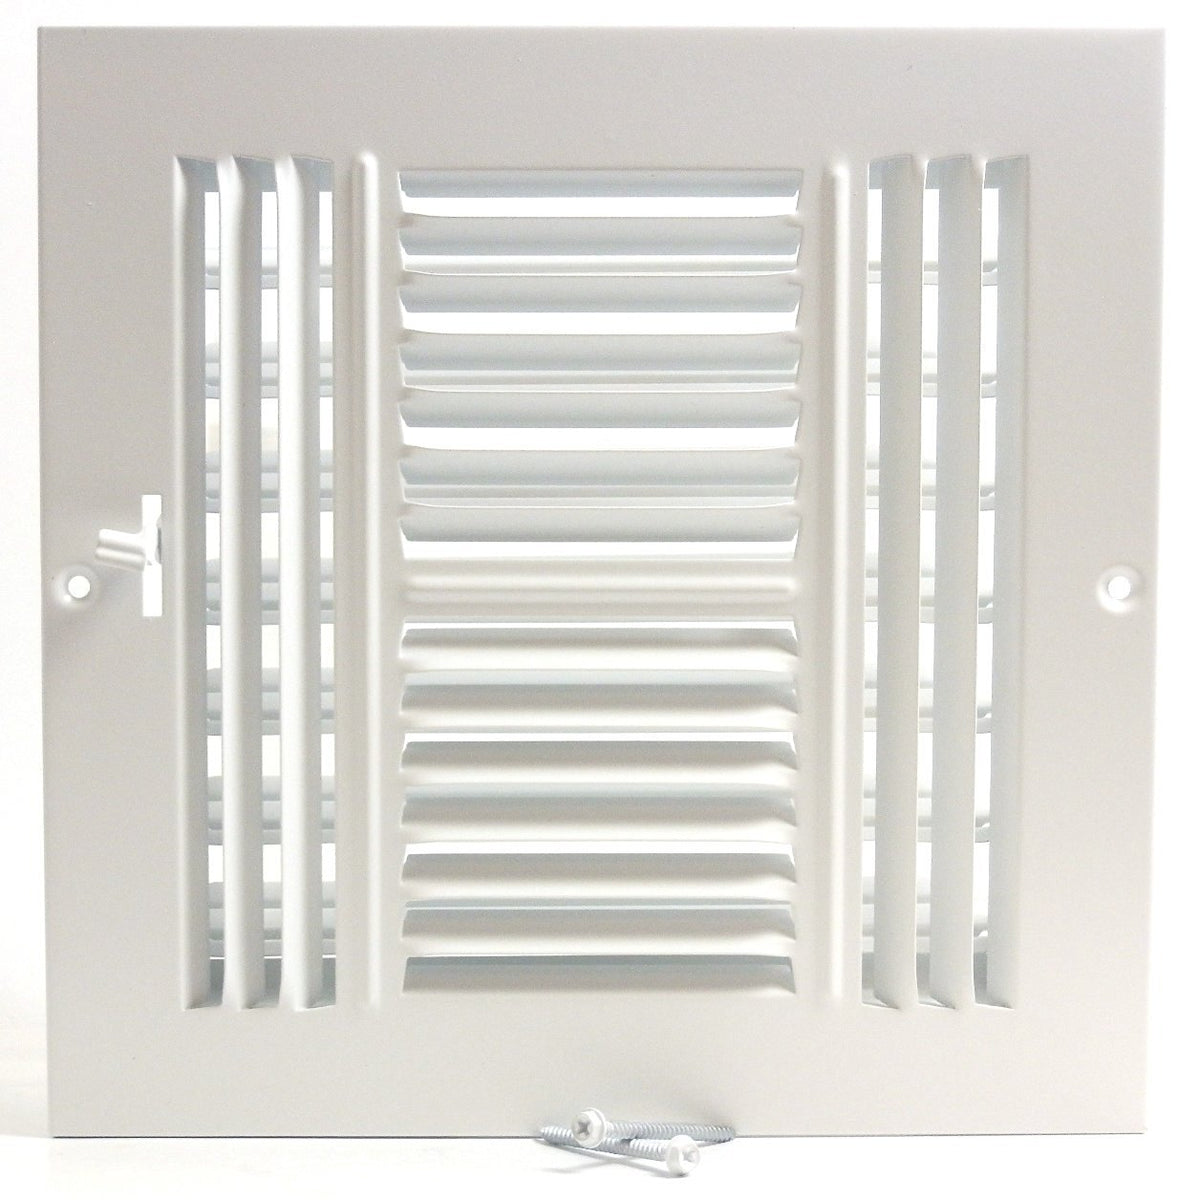 12&quot; X 12&quot; 4-Way AIR SUPPLY GRILLE - DUCT COVER &amp; DIFFUSER - Flat Stamped Face